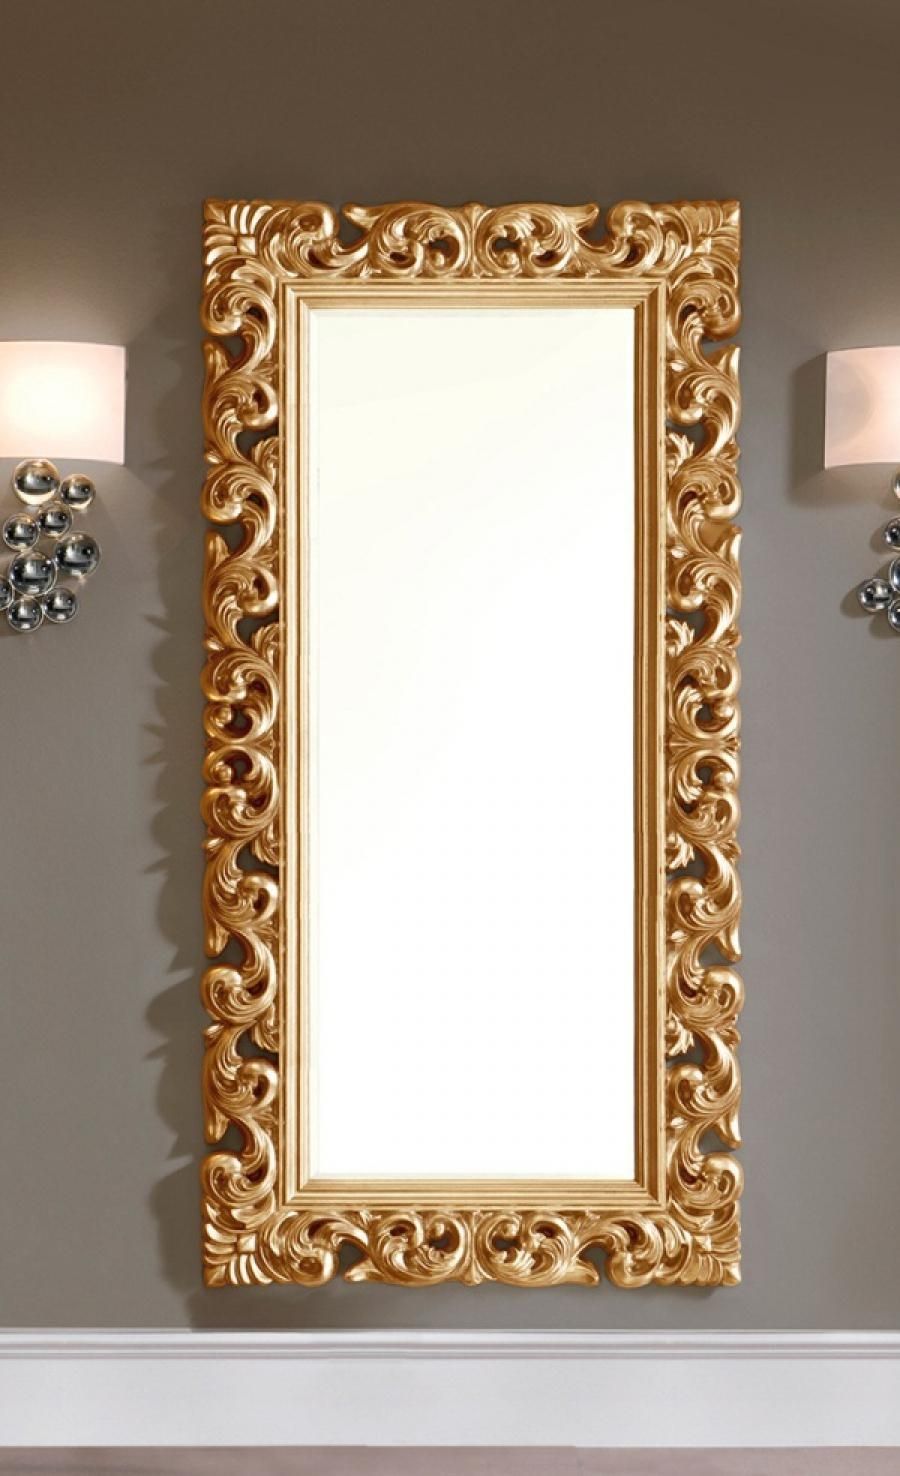 Large Modern Ornate Mirror In Gold Colour Finish Throughout Modern Hall Mirrors (View 18 of 20)